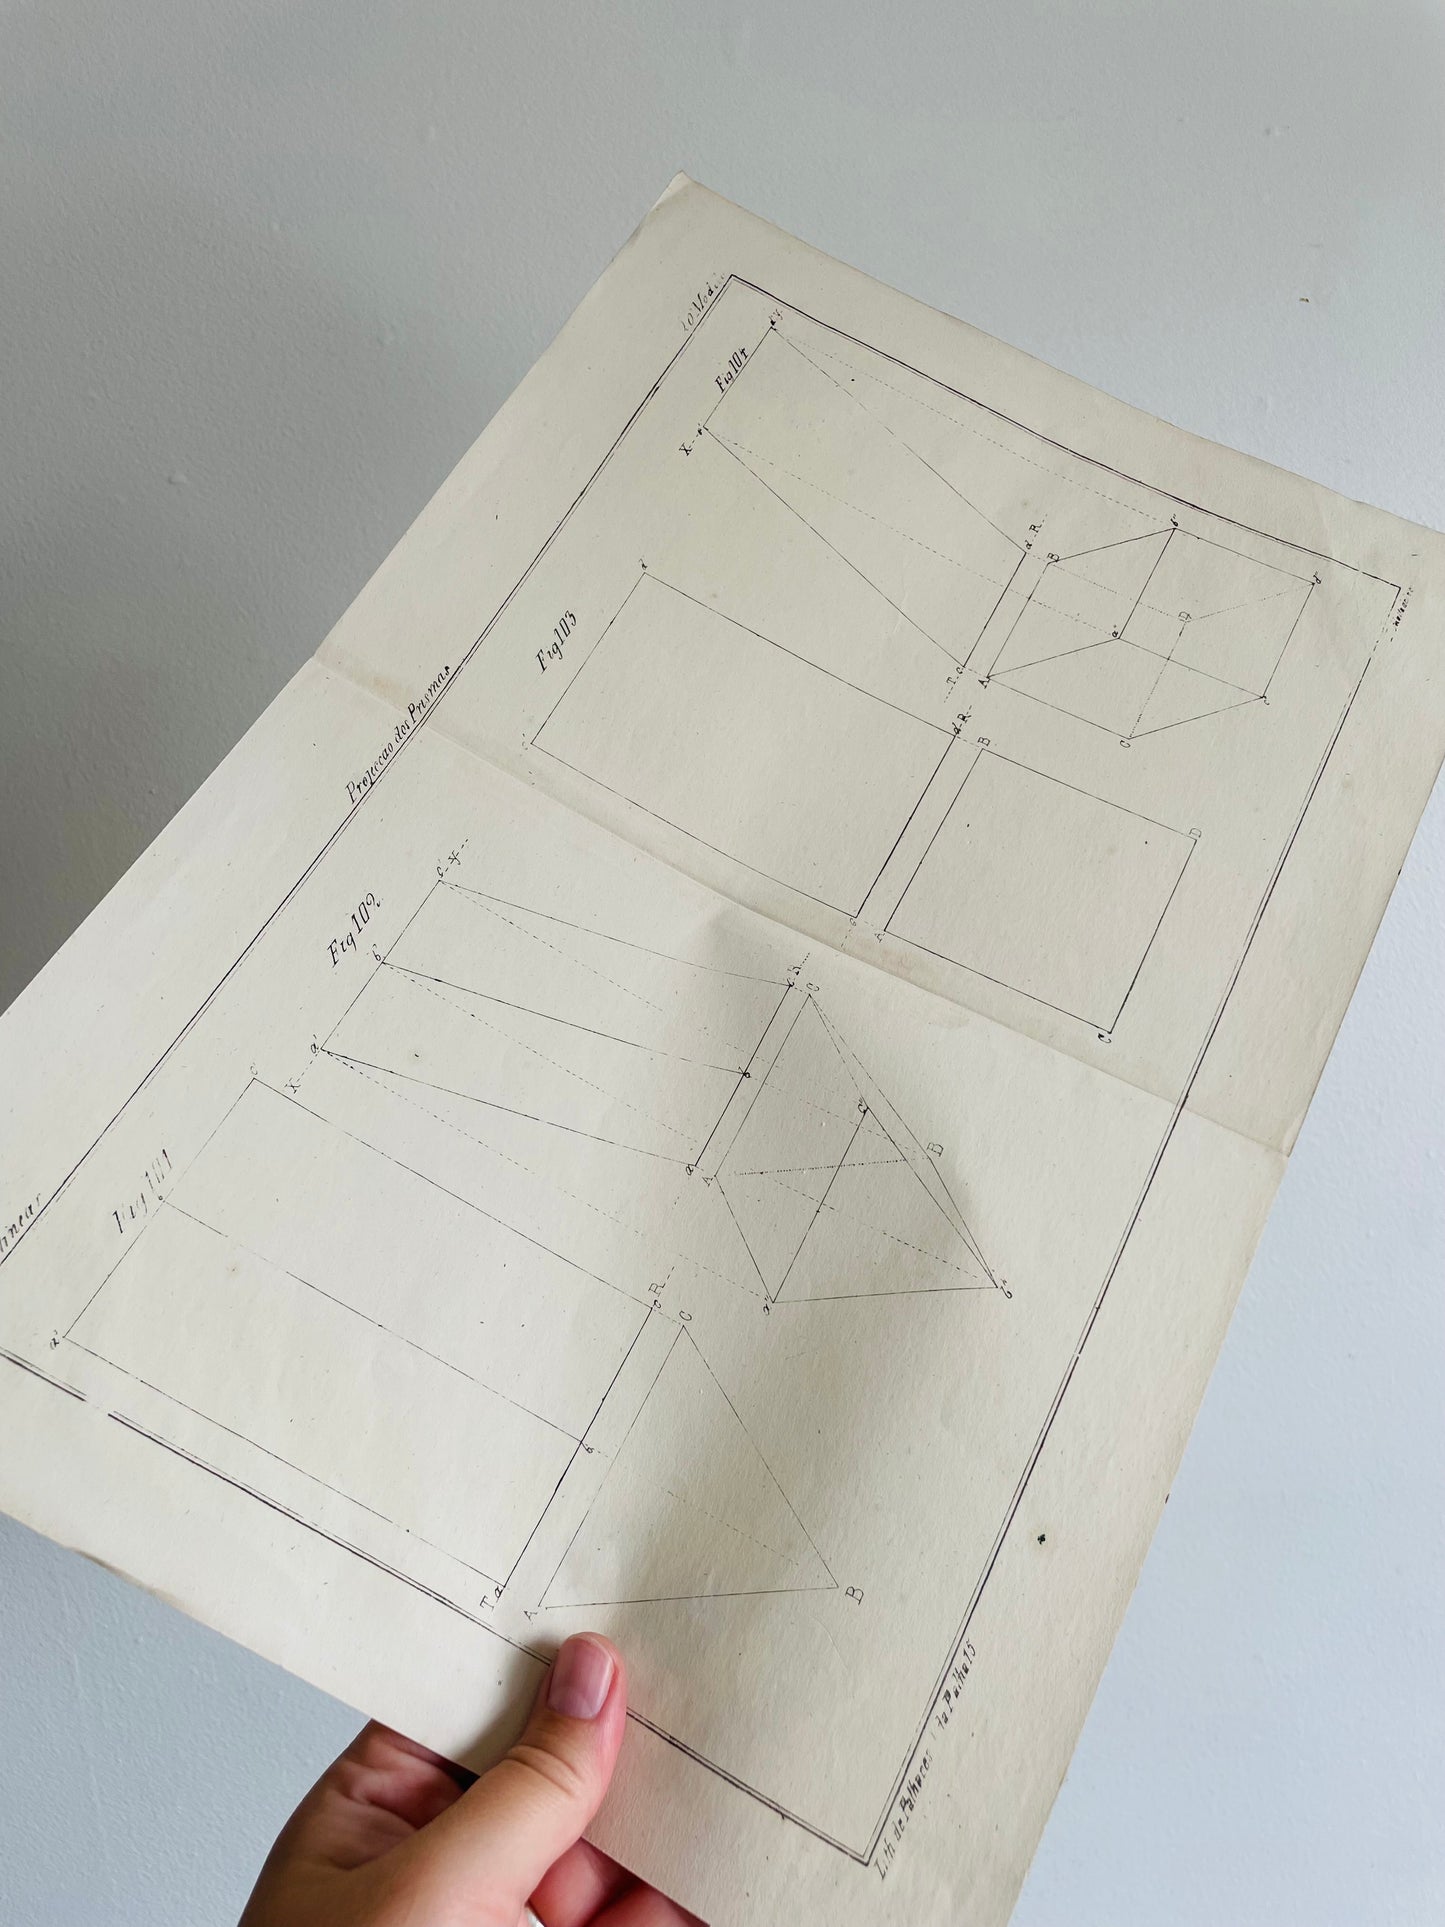 Antique Architecture Art Student Portfolio Drawing - Projection of Prisms # 1 - Found in Lisbon, Portugal